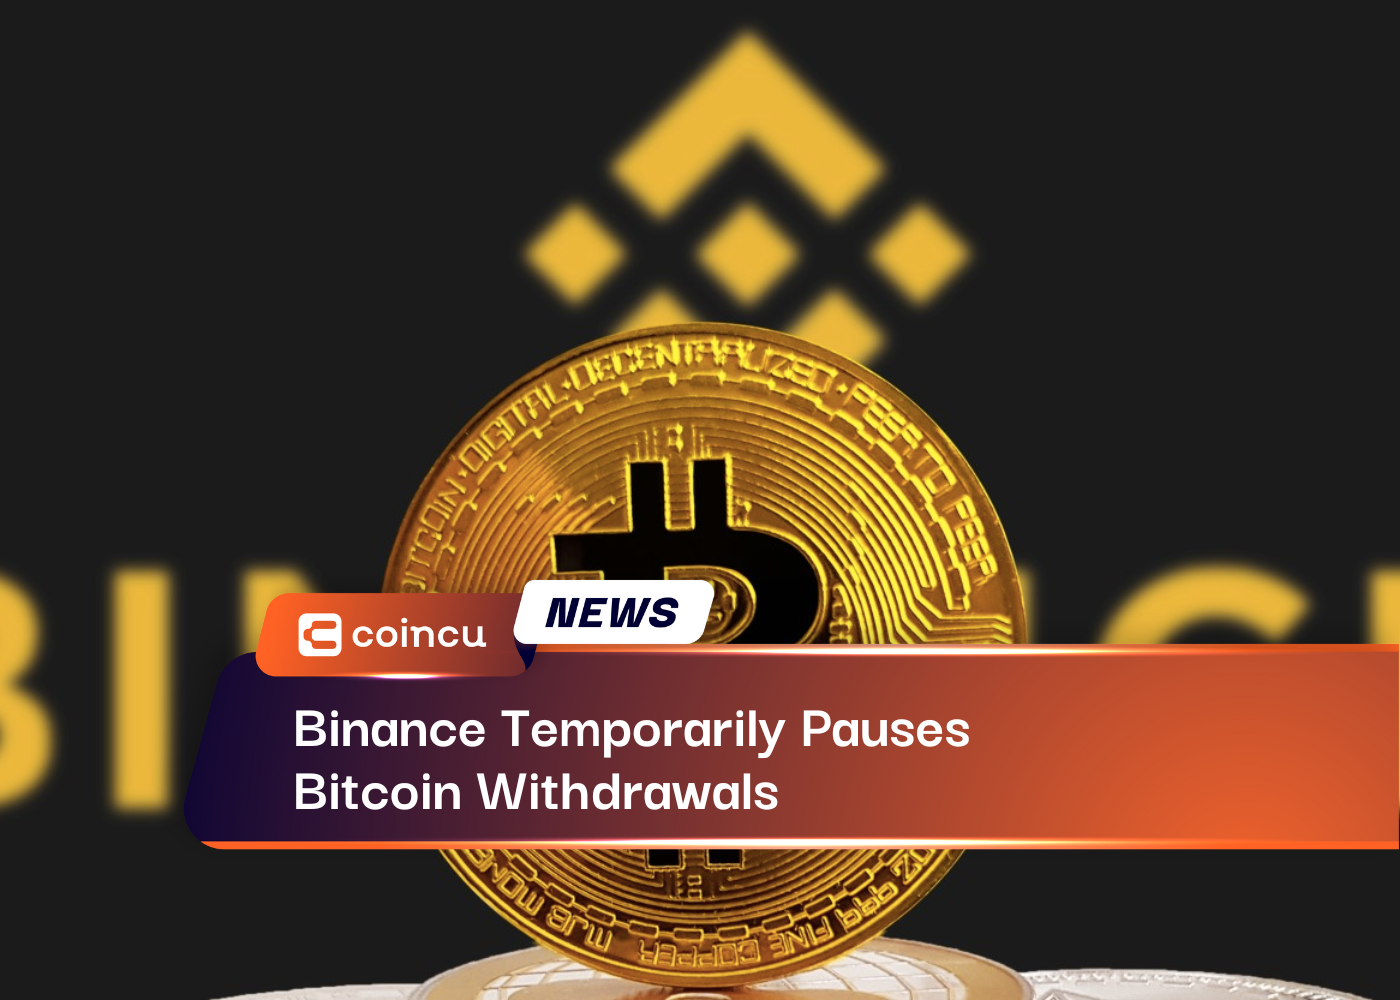 Binance Temporarily Pauses Bitcoin Withdrawals